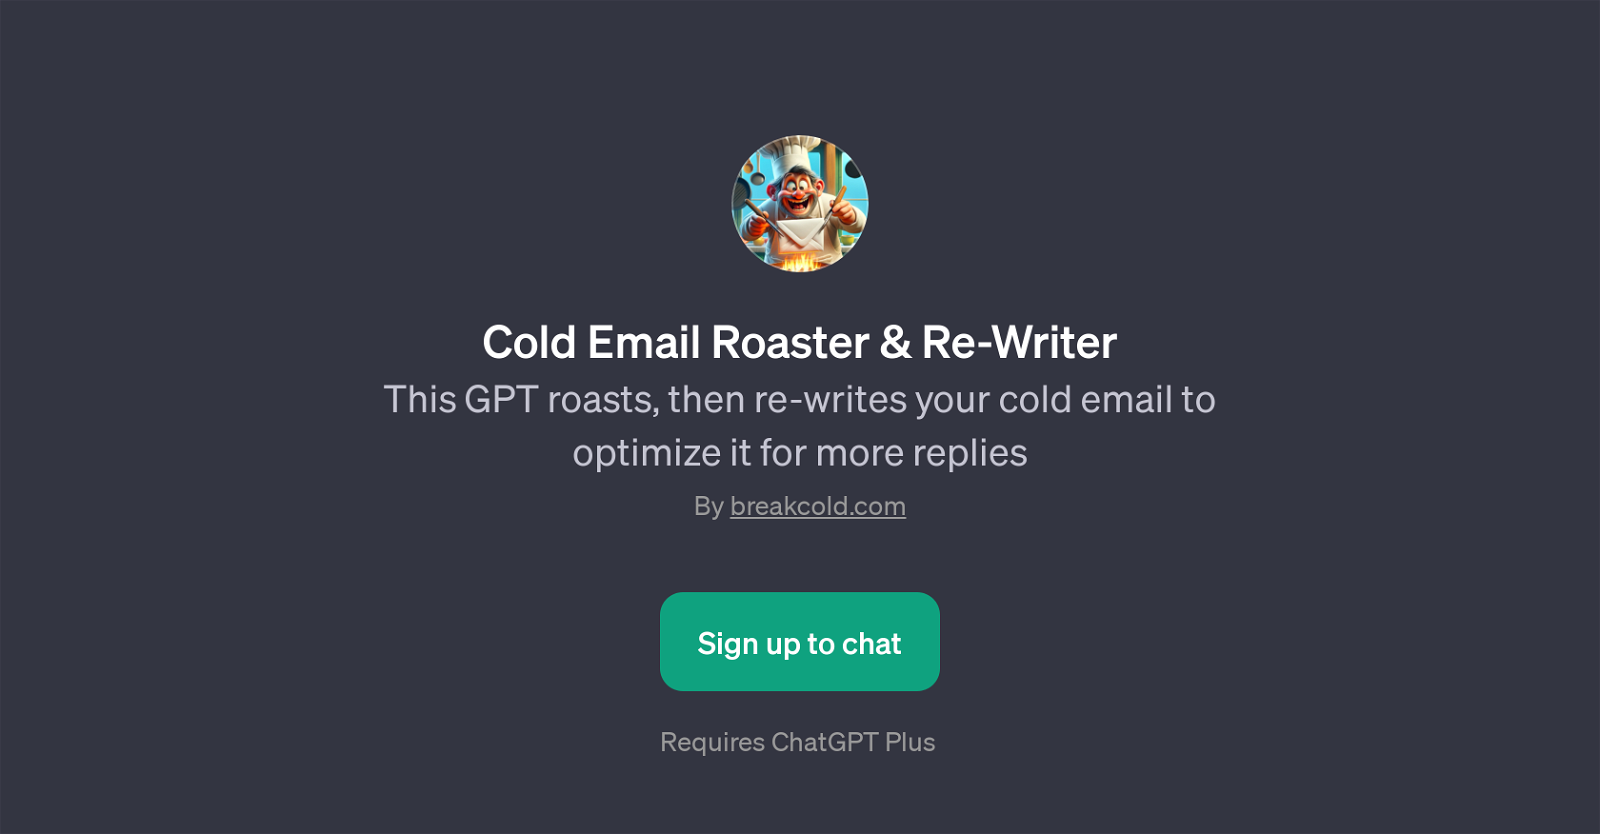 Cold Email Roaster & Re-Writer website